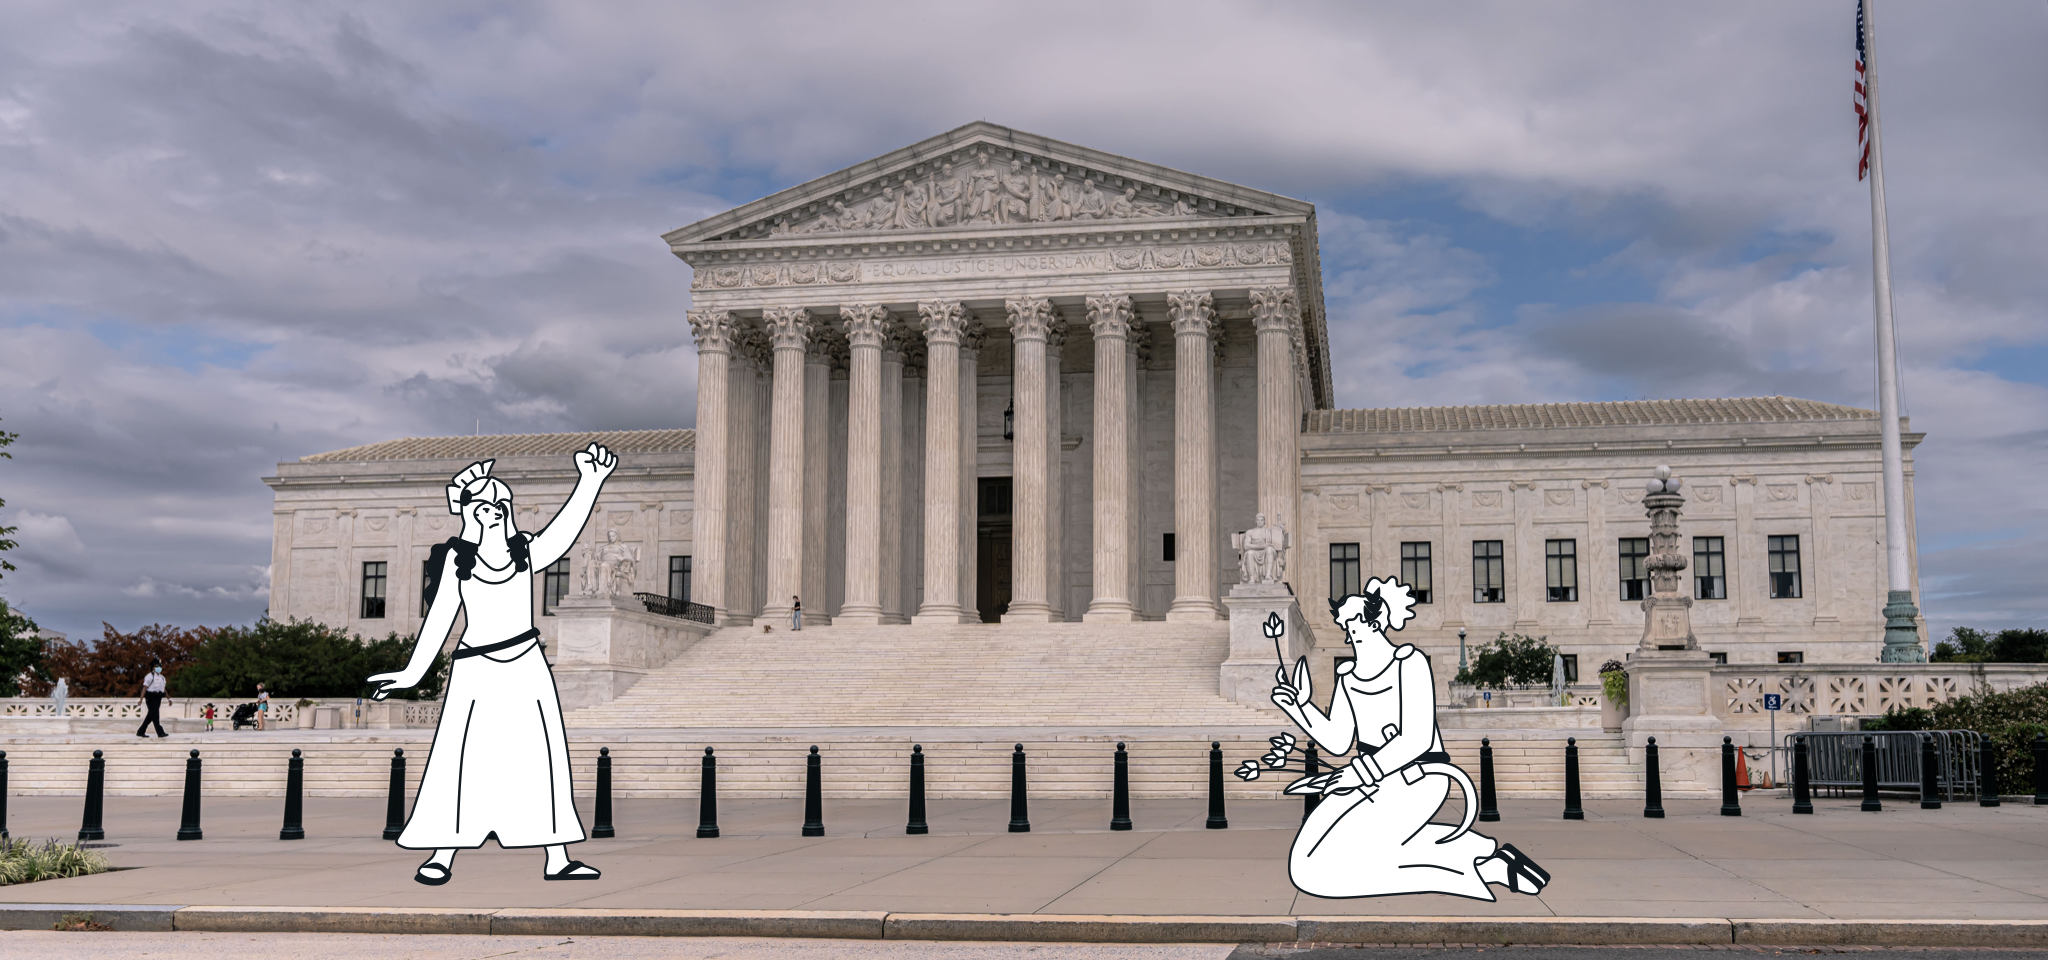 Greek goddesses in front of the Supreme Court.